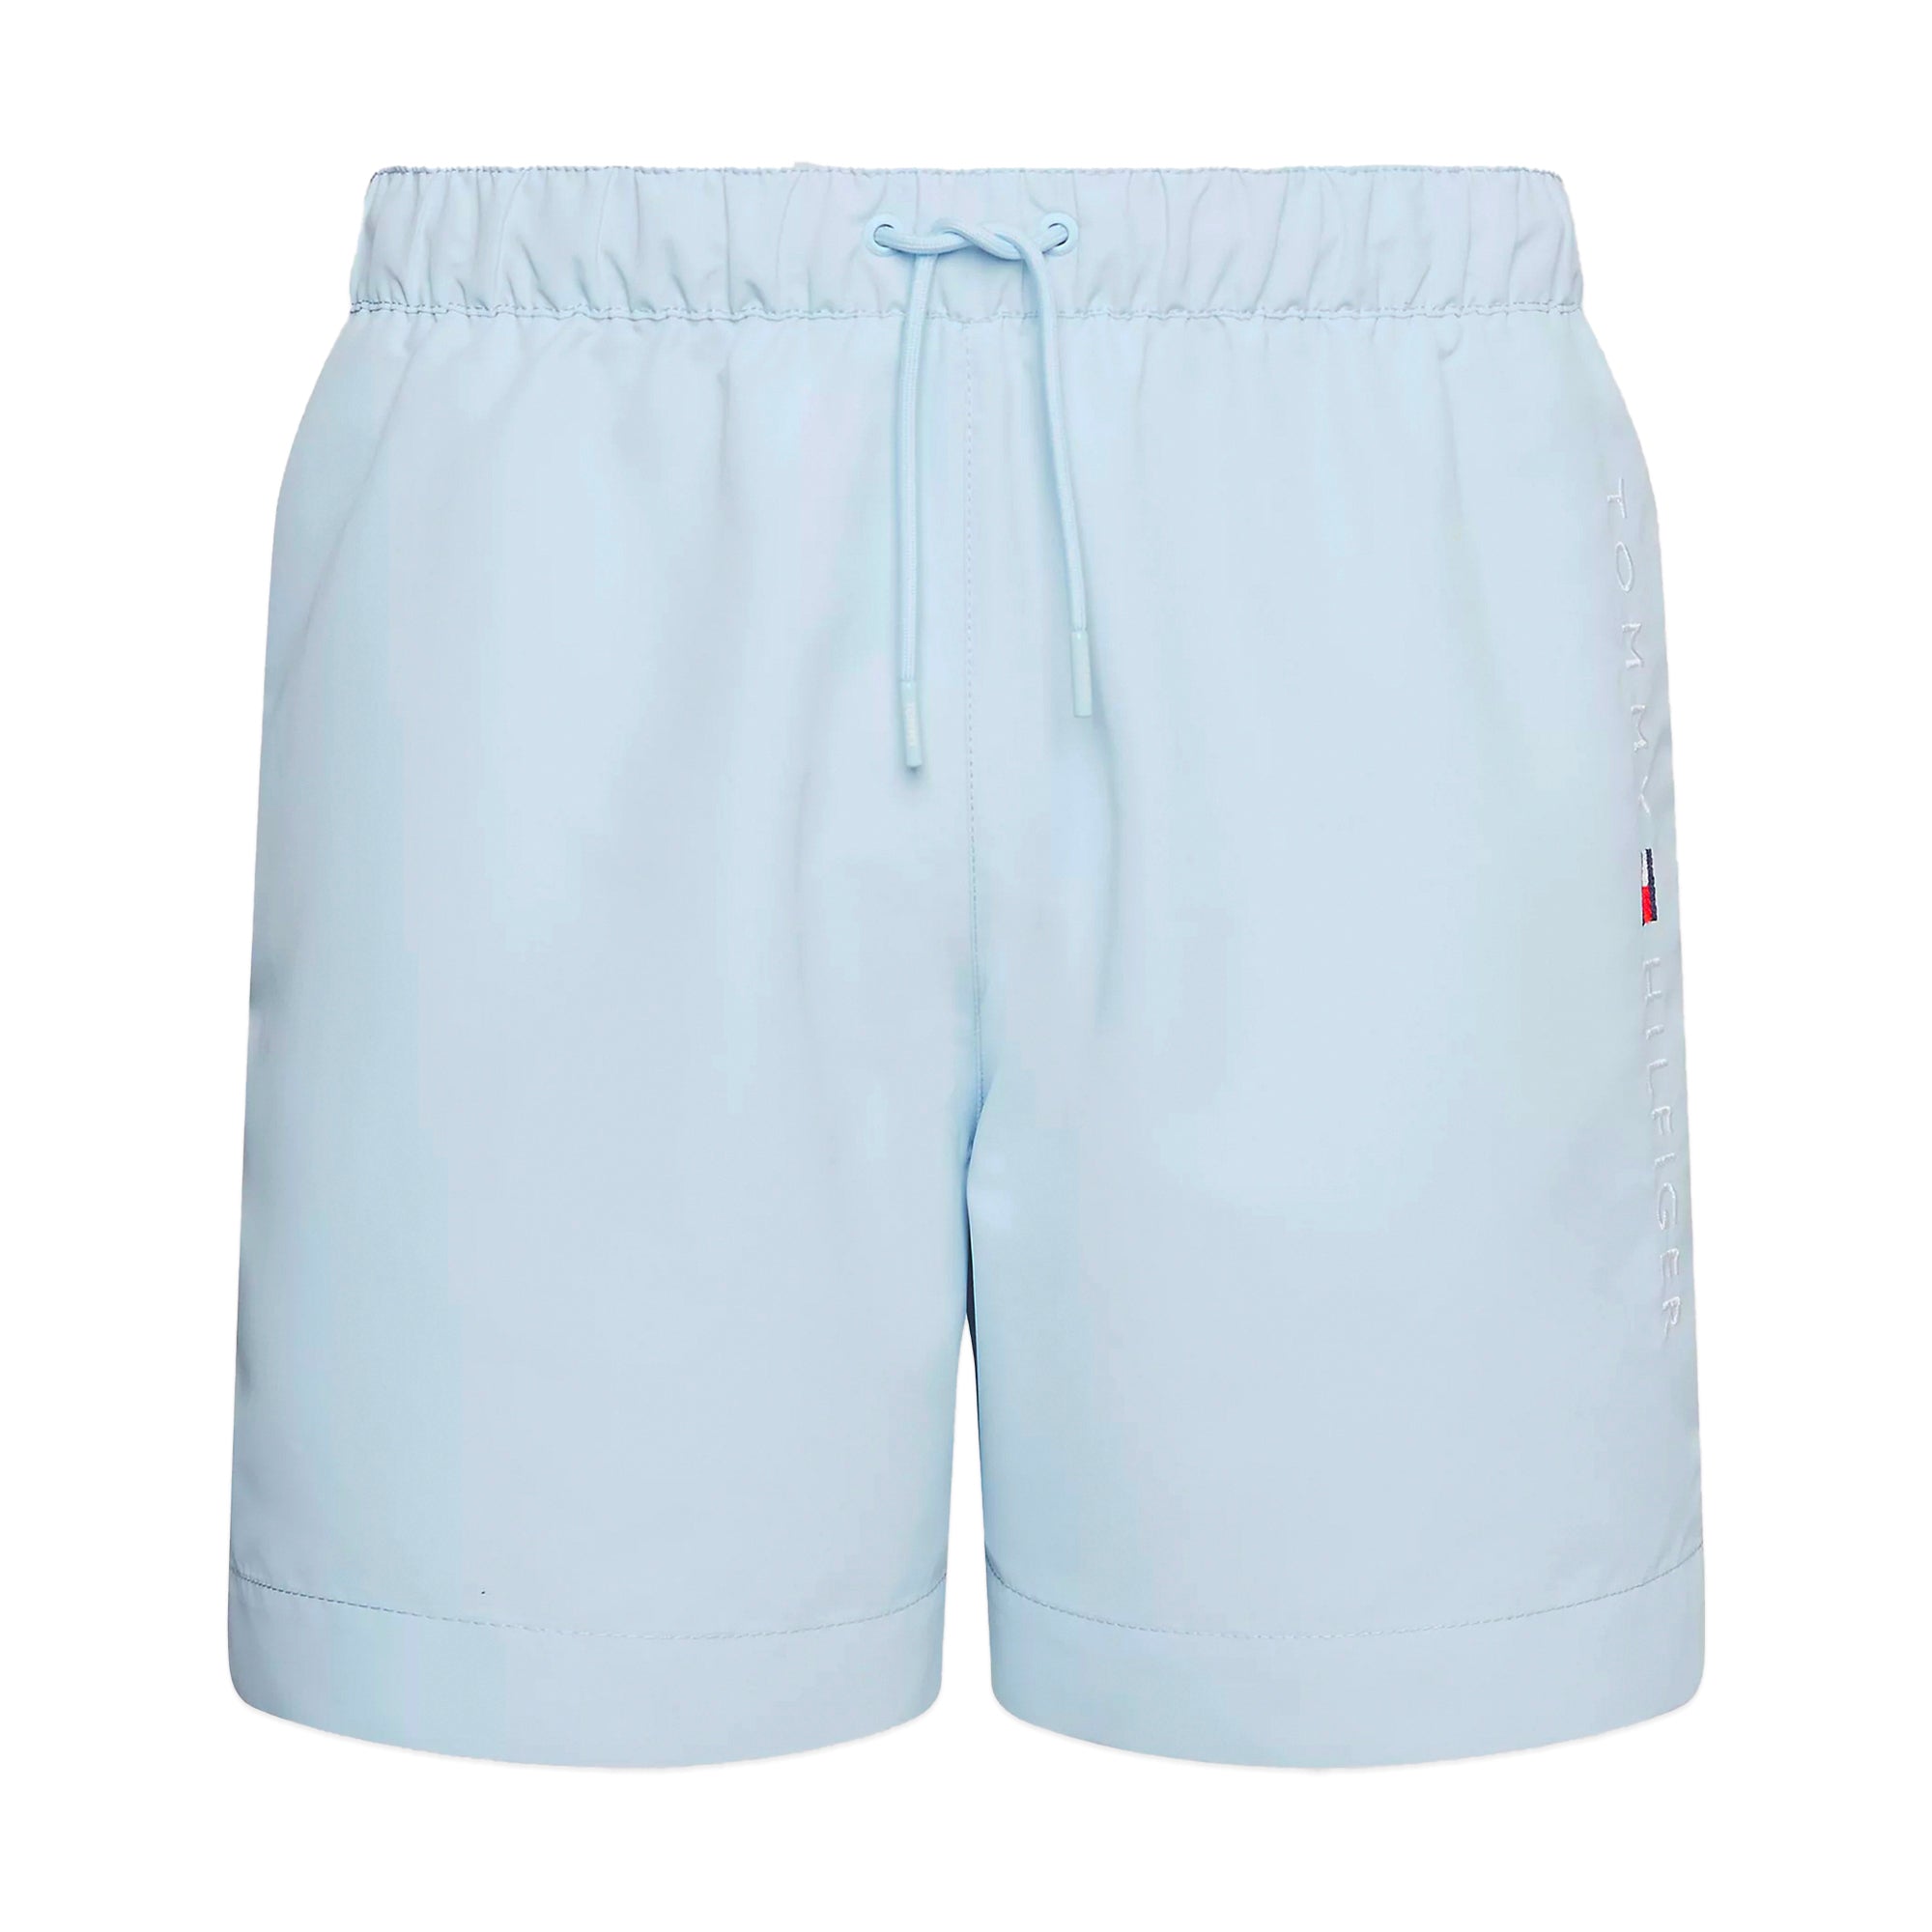 Tommy Hilfiger Mid Length Embroidered Swim Shorts - Breezy Blue